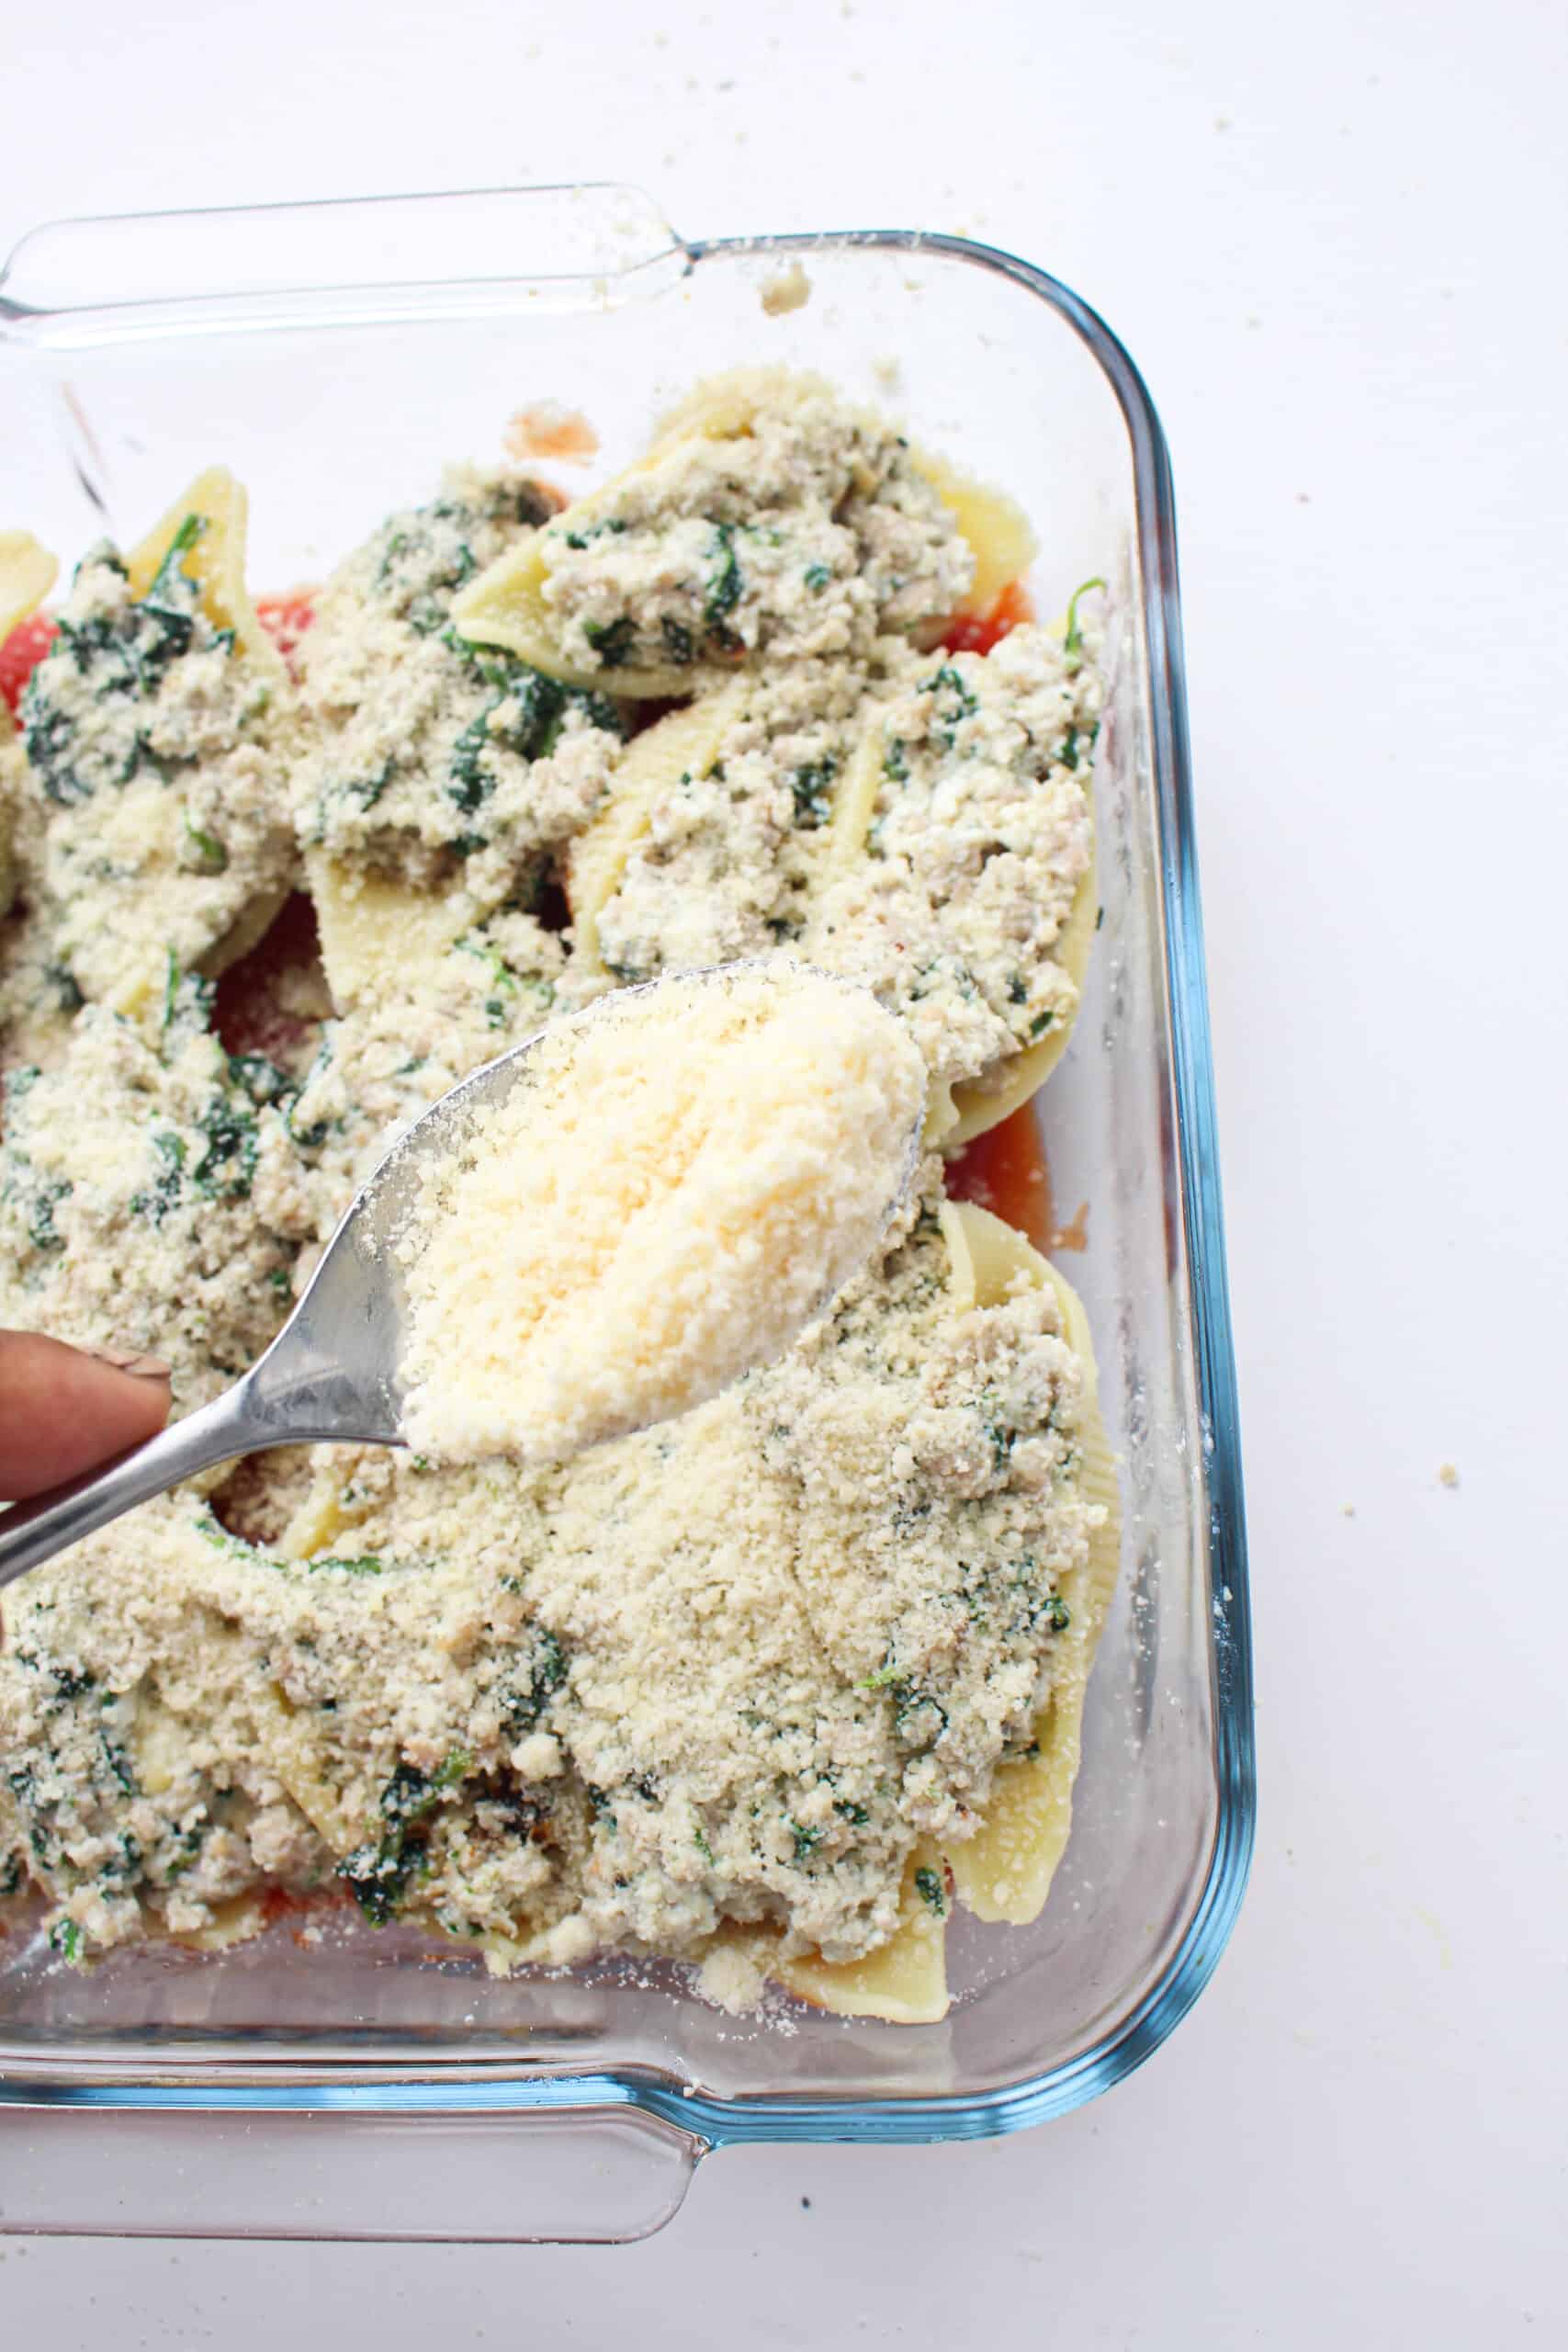 Salmon and spinach stuffed pasta shells	
